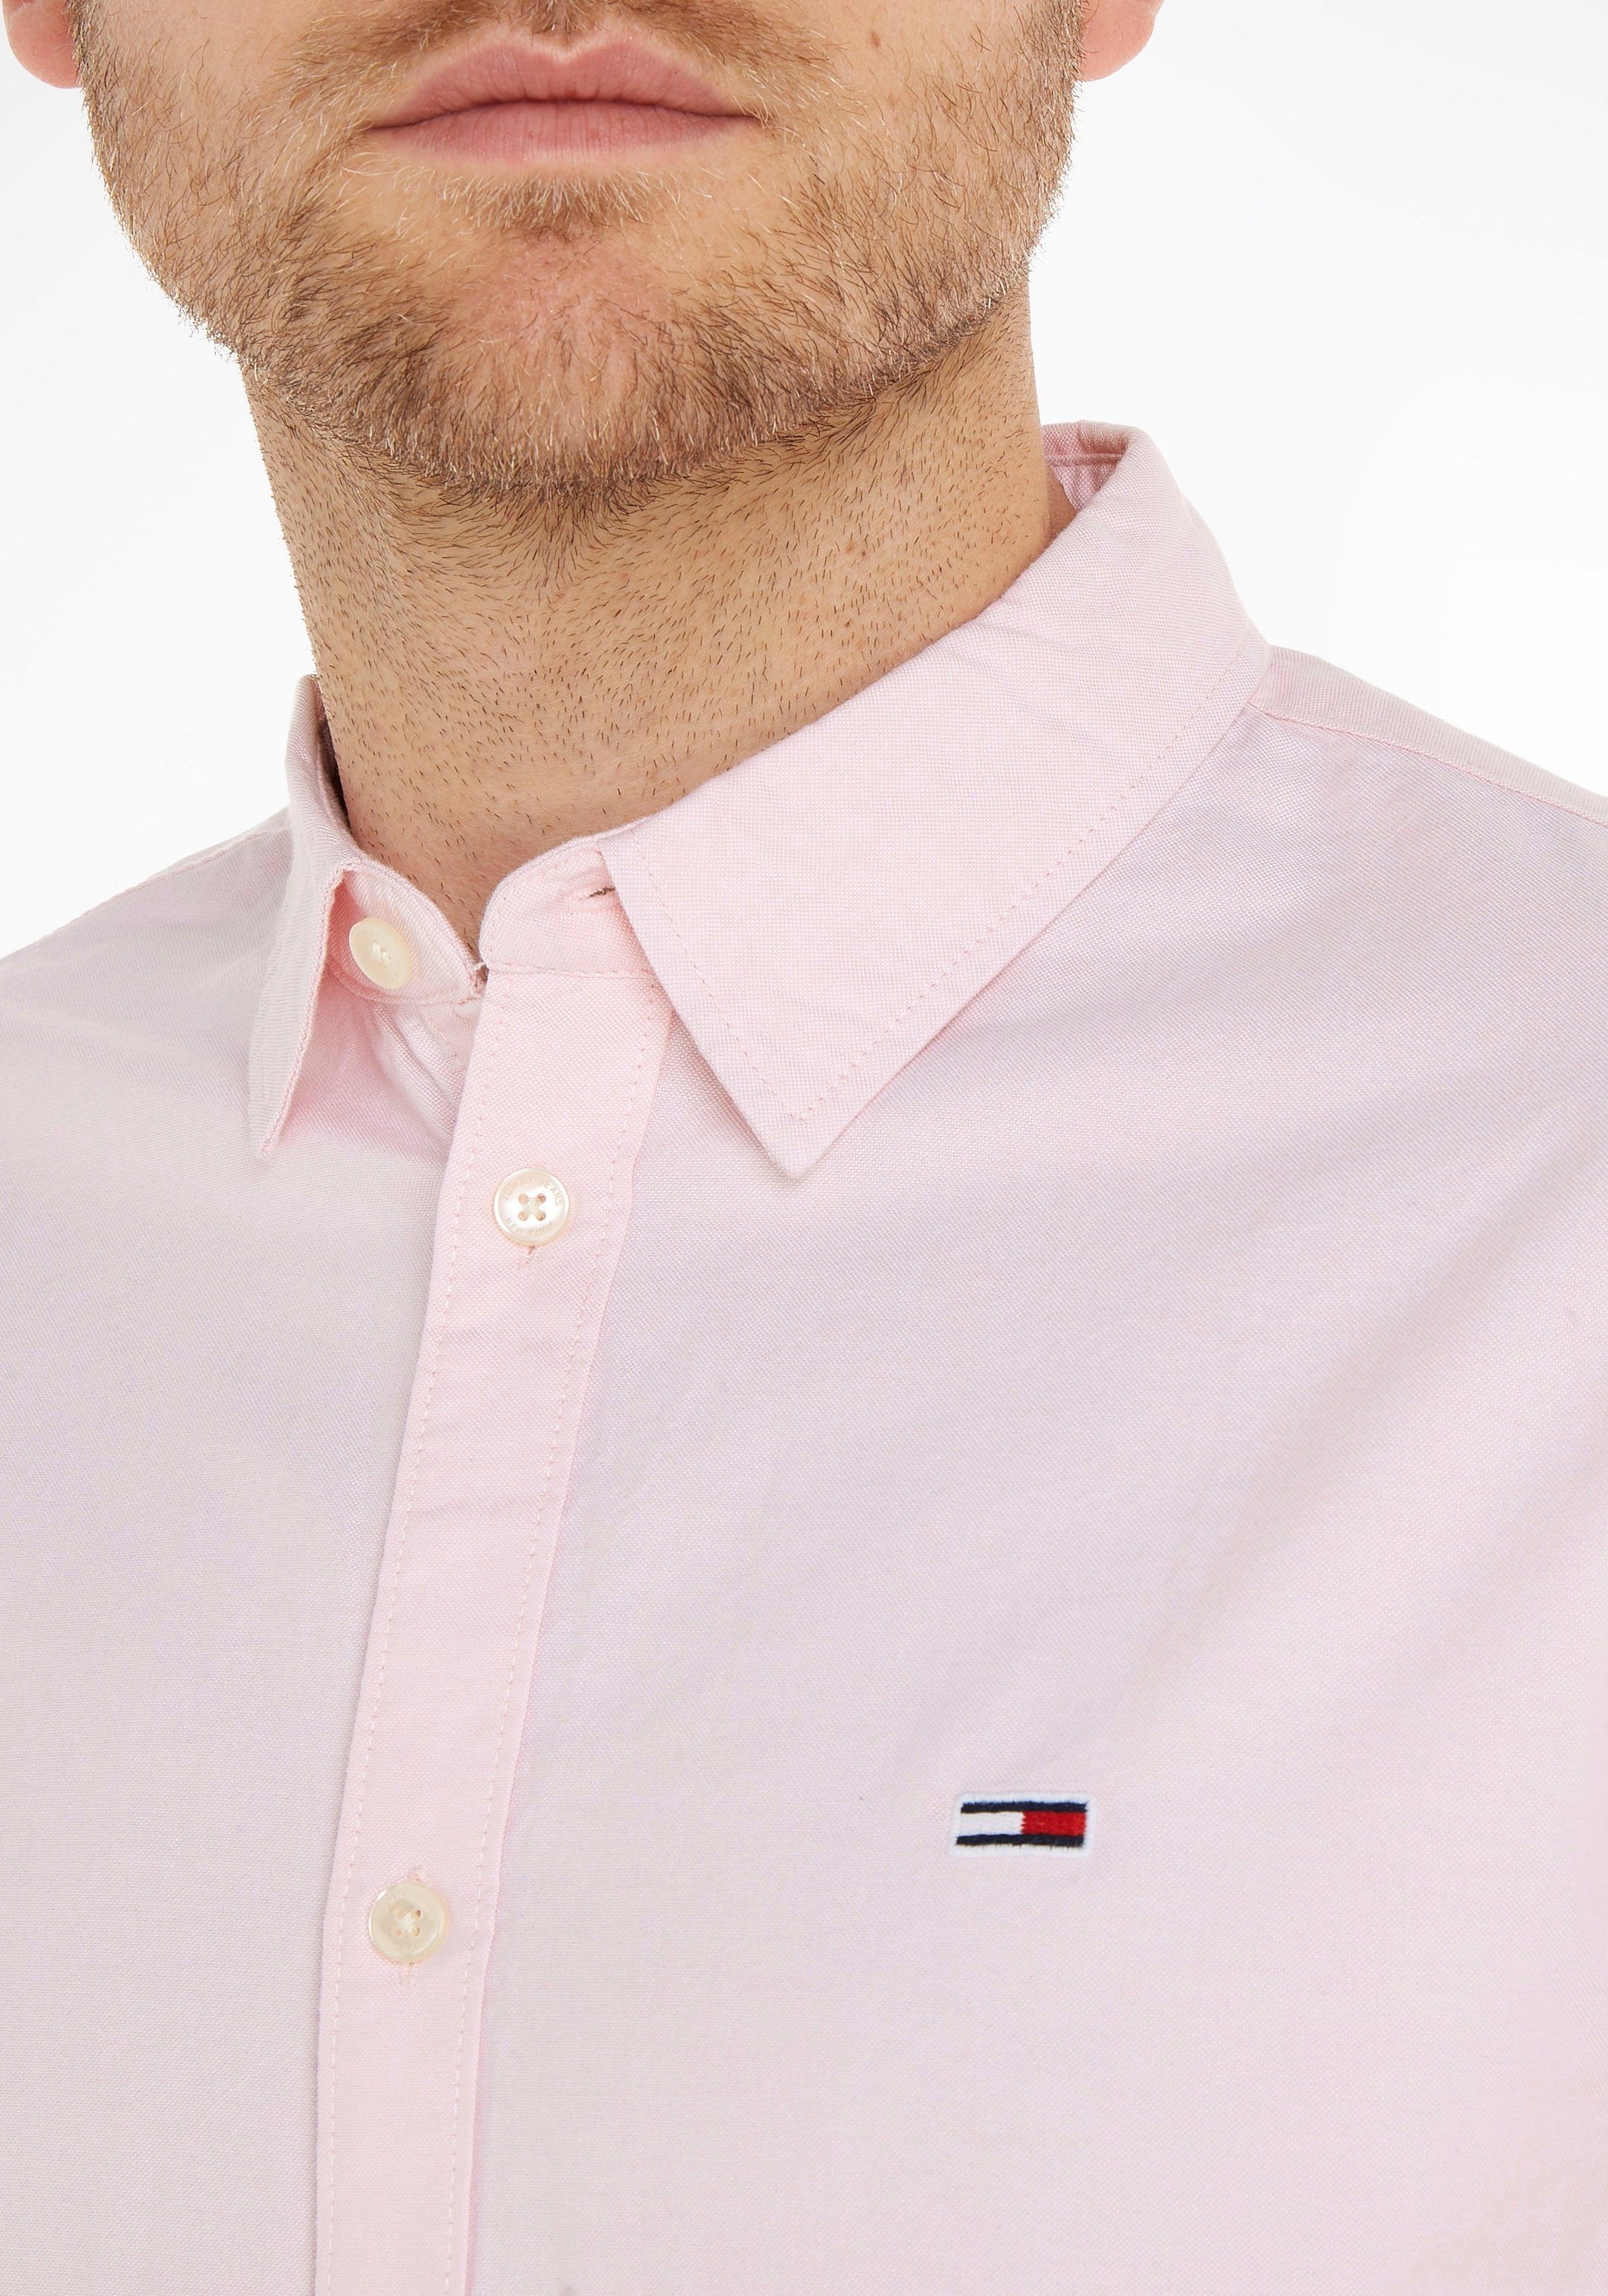 Tommy Jeans Langarmhemd TJM OXFORD Knopfleiste SHIRT pink CLASSIC mit